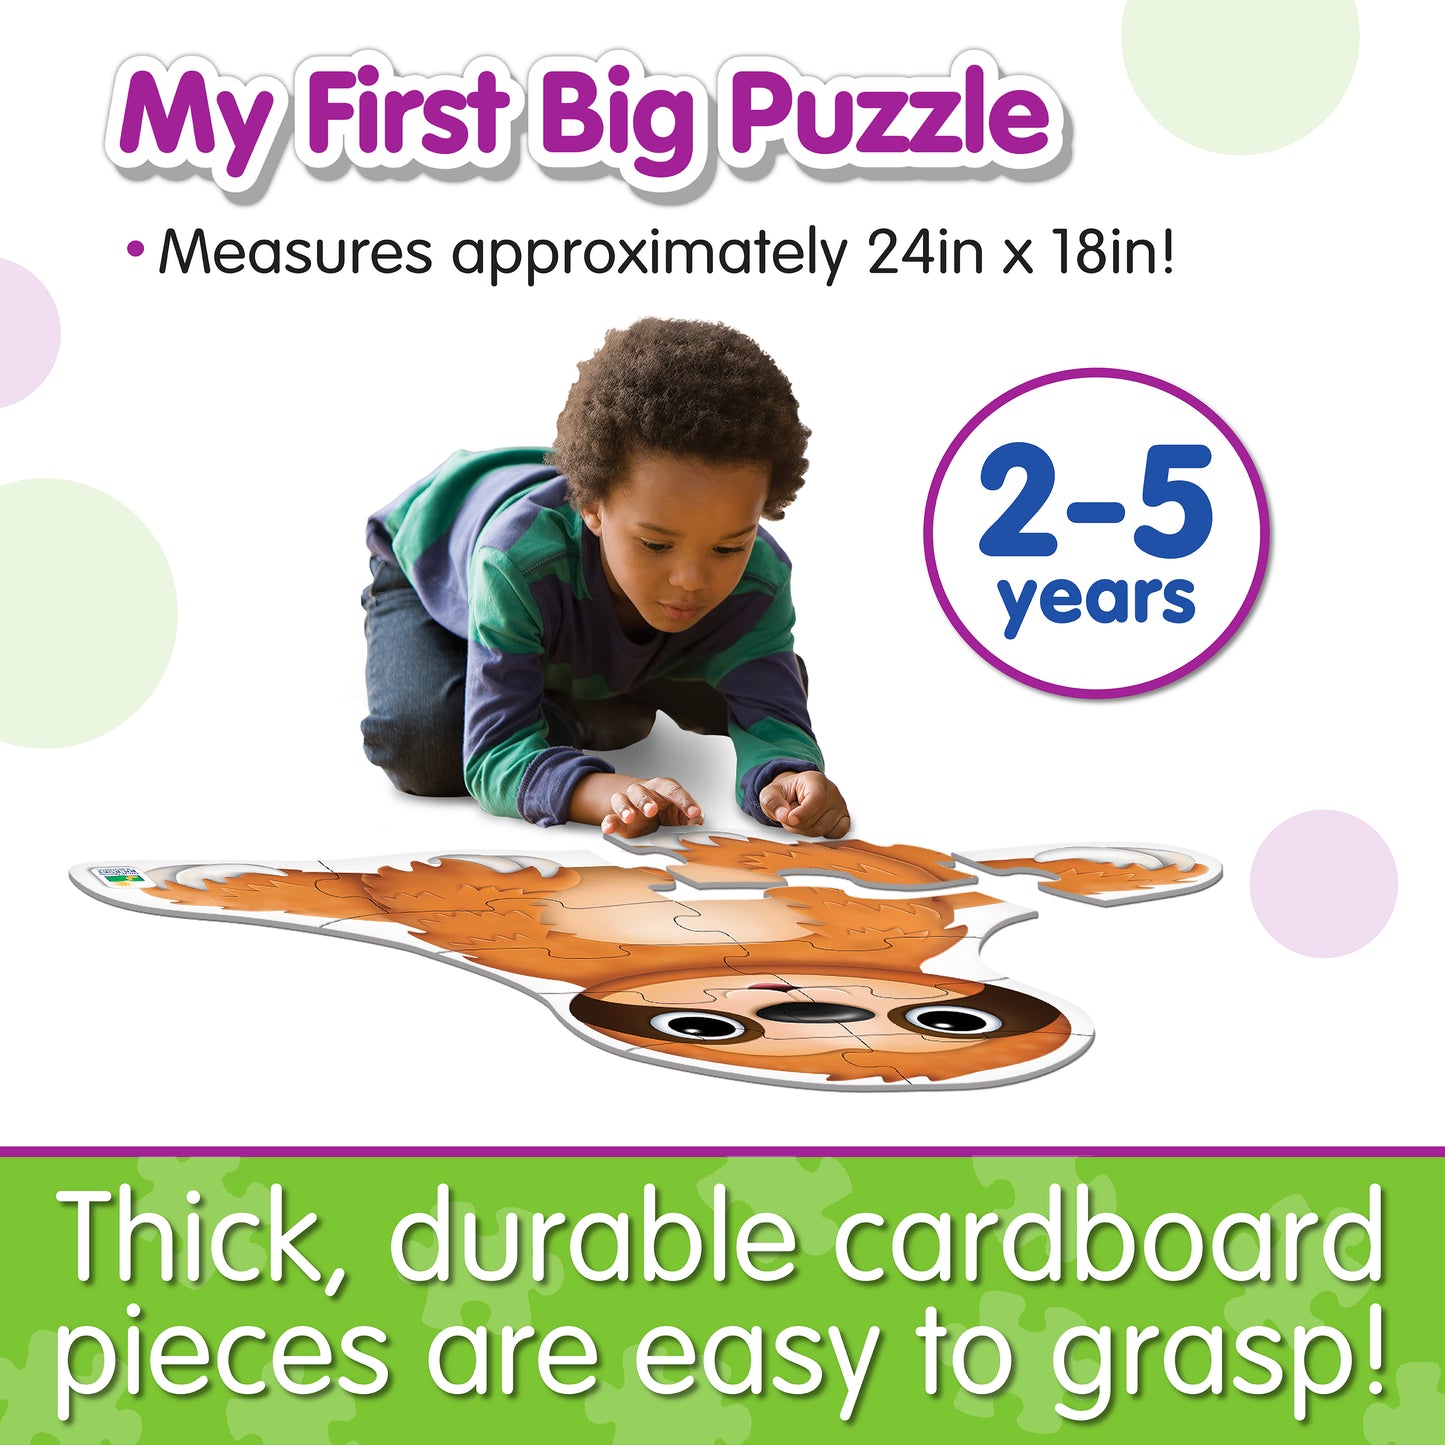 Infographic about My First Big Puzzle - Sleepy Sloth's features that says, "Thick, durable cardboard pieces are easy to grasp!"